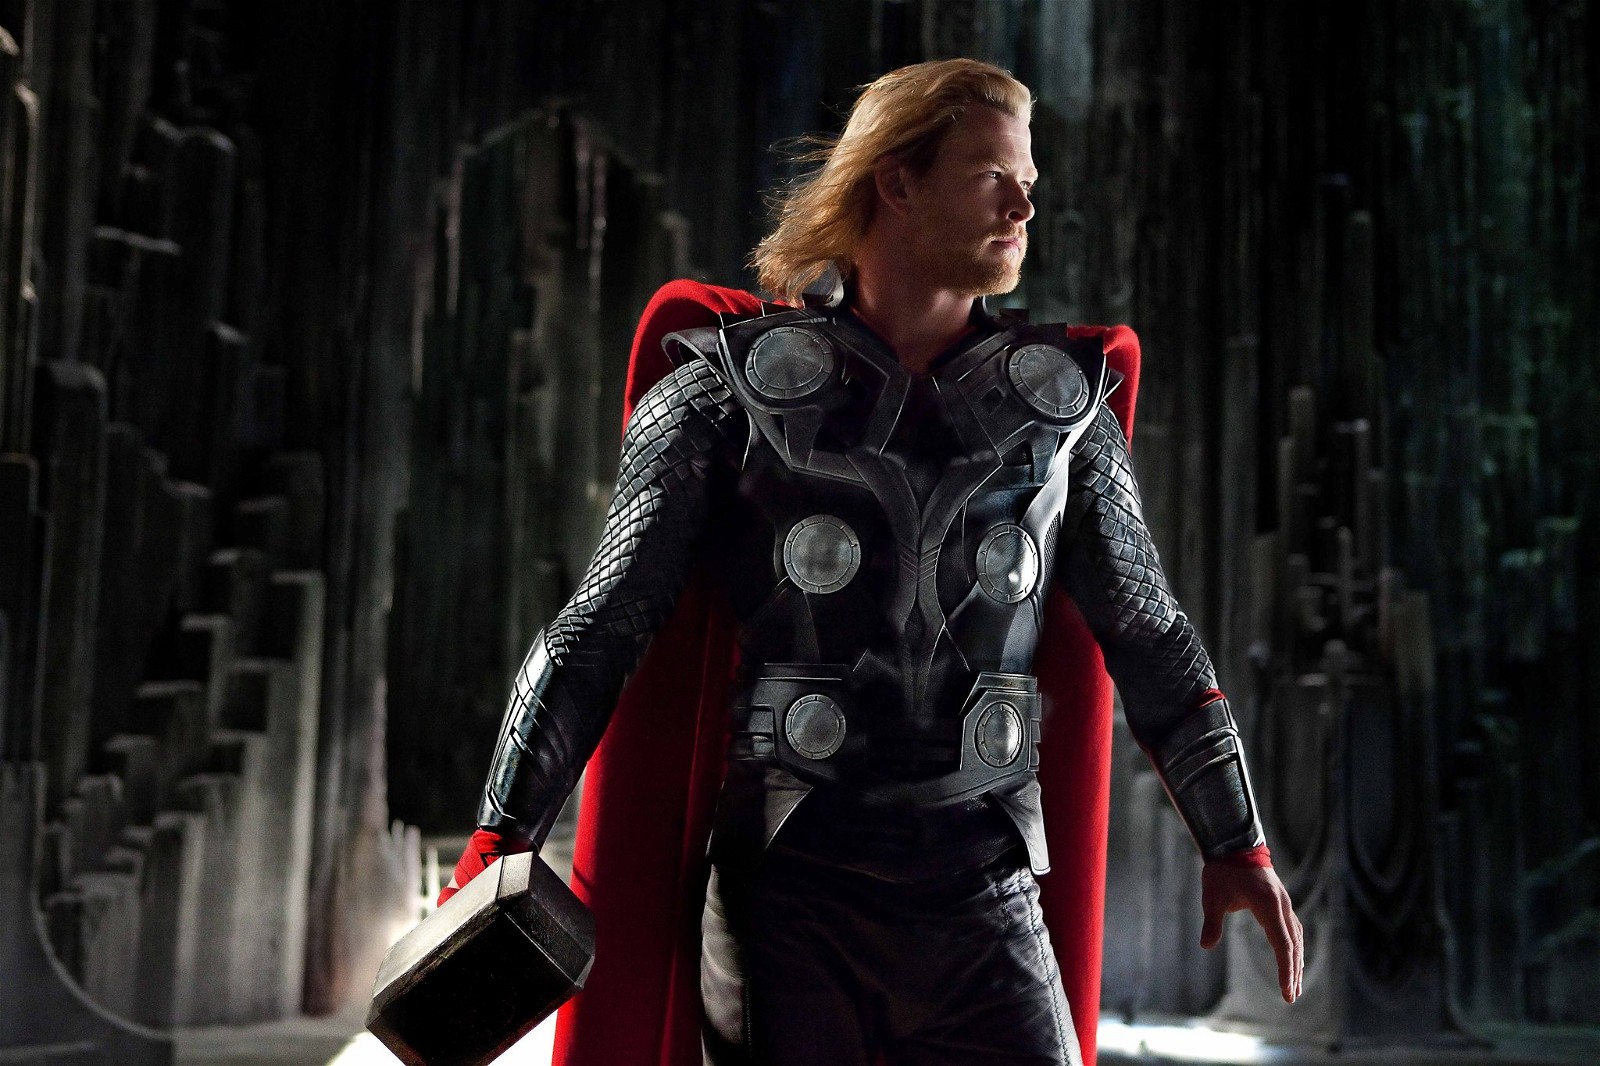 Chris Hemsworth is known for portraying Thor in the MCU